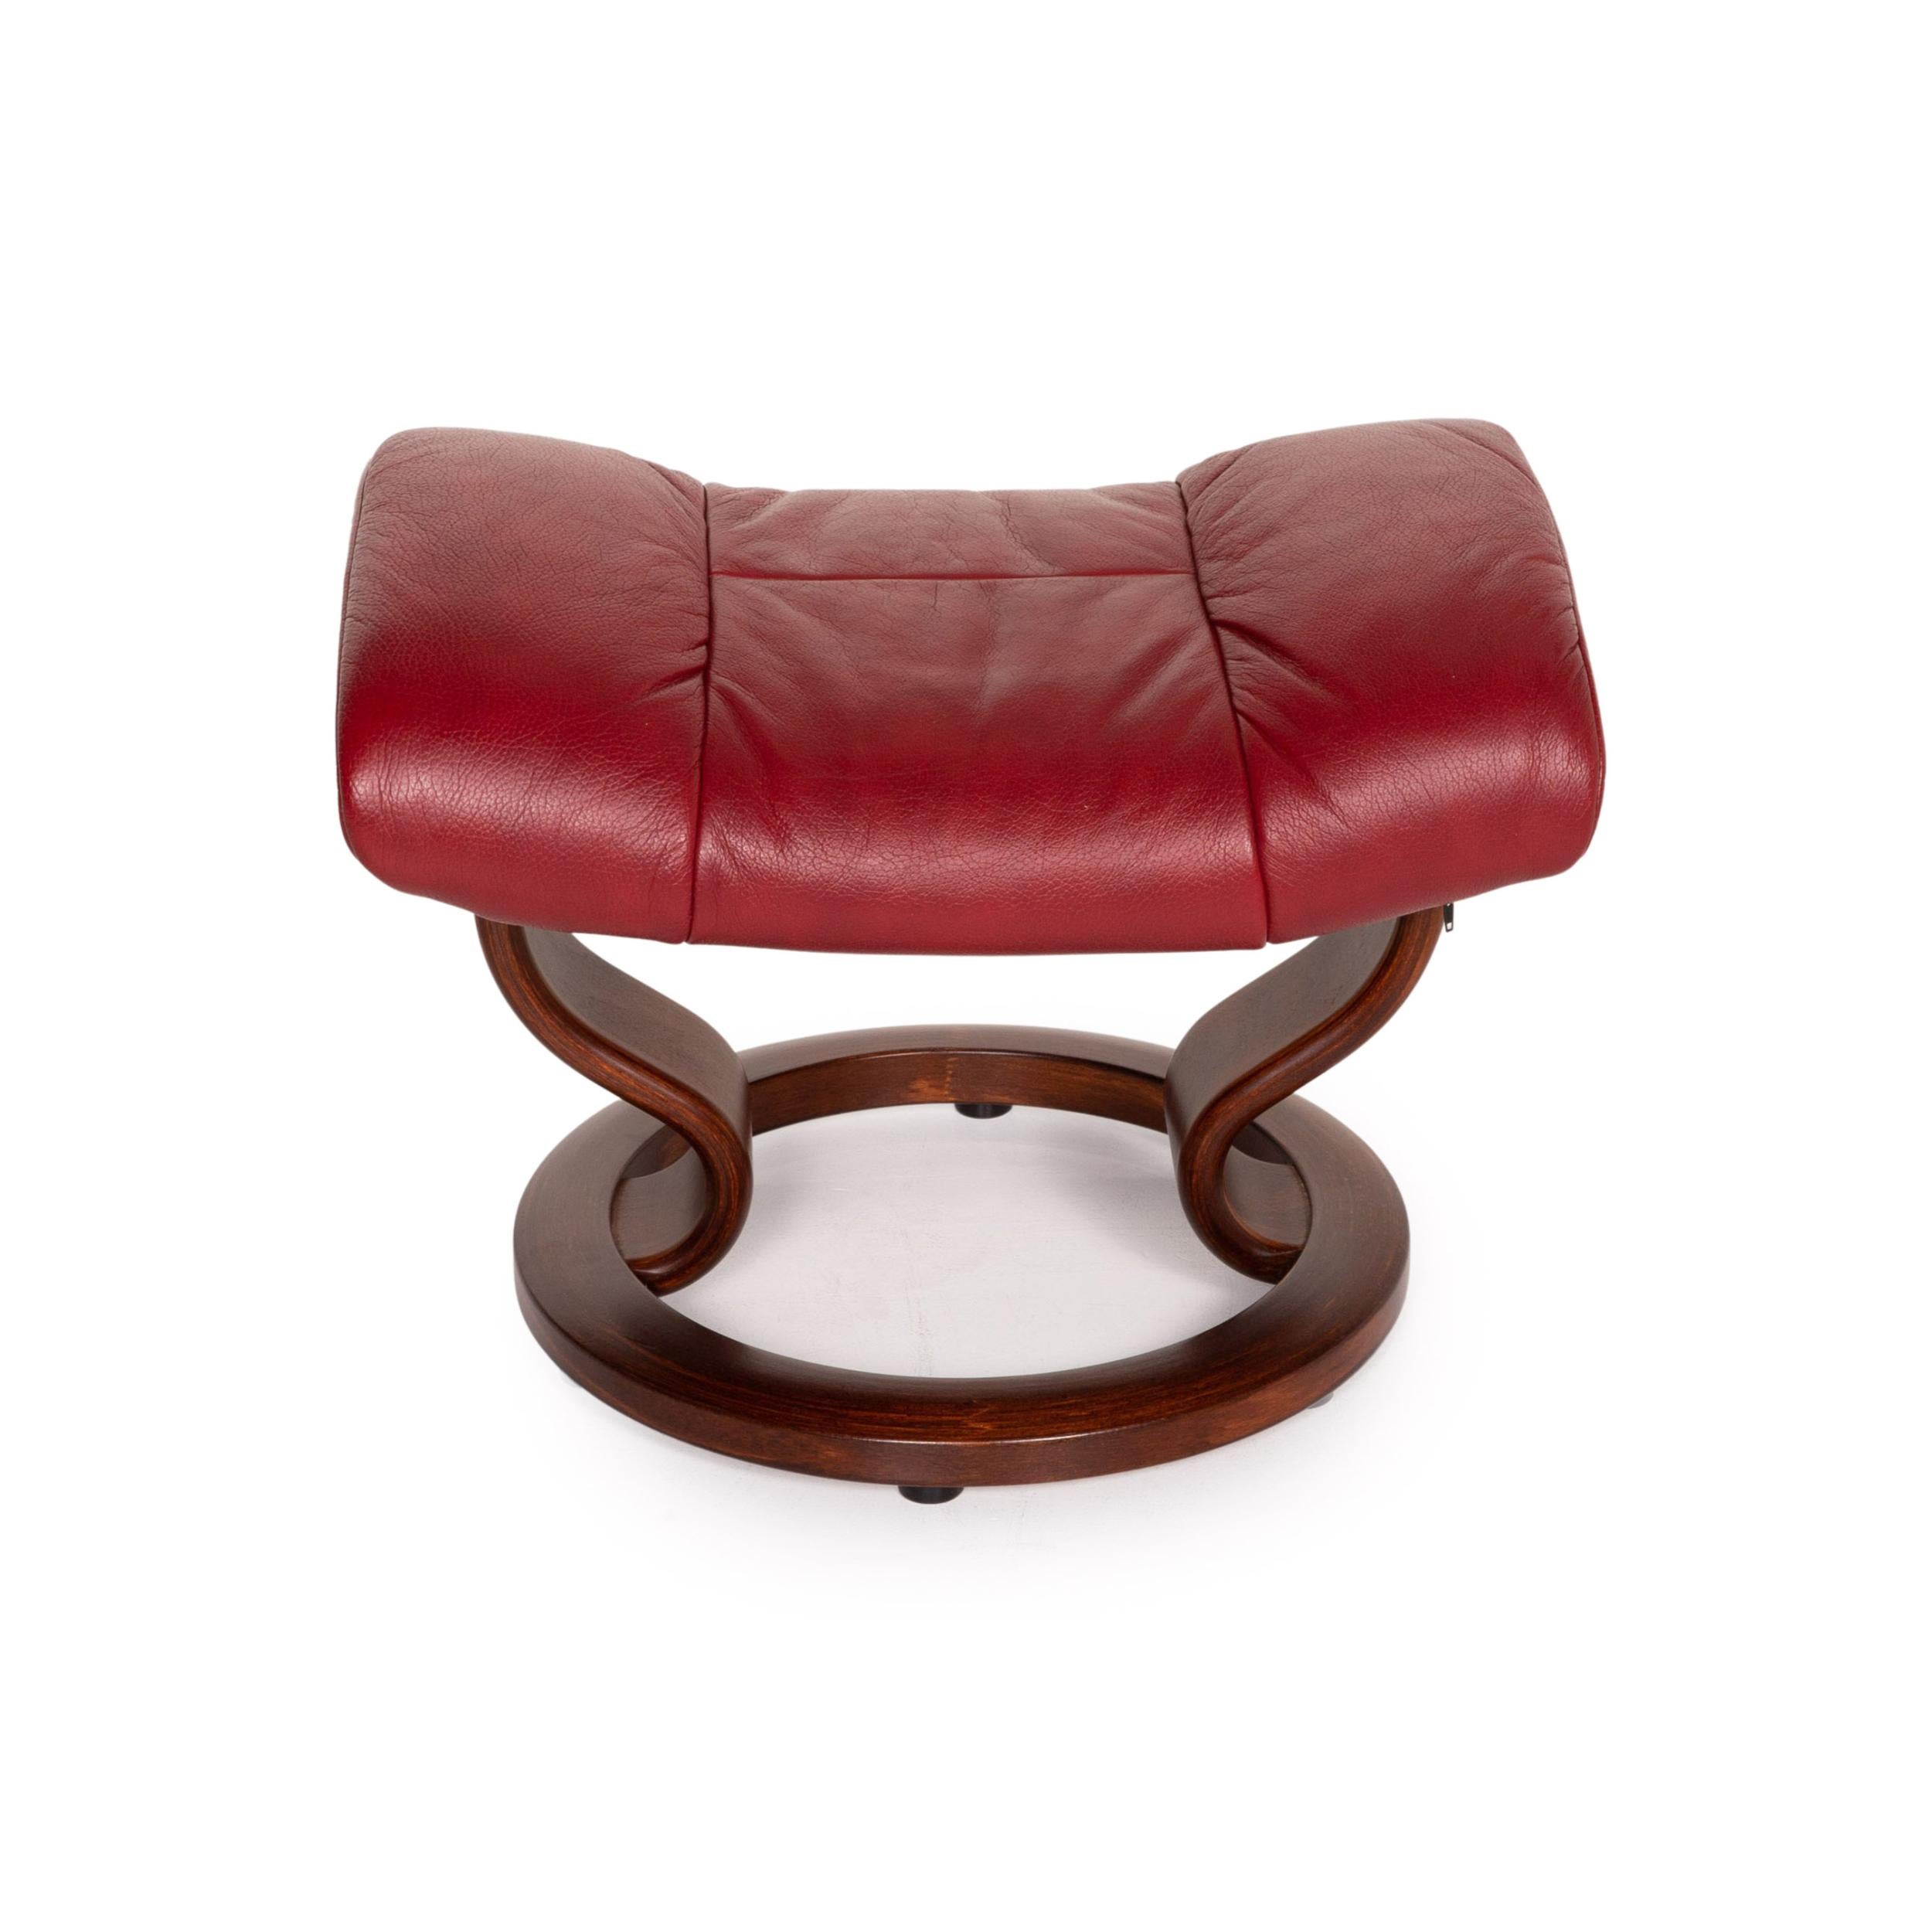 Stressless Mayfair Leather Stool Red Wood Ottoman In Excellent Condition For Sale In Cologne, DE